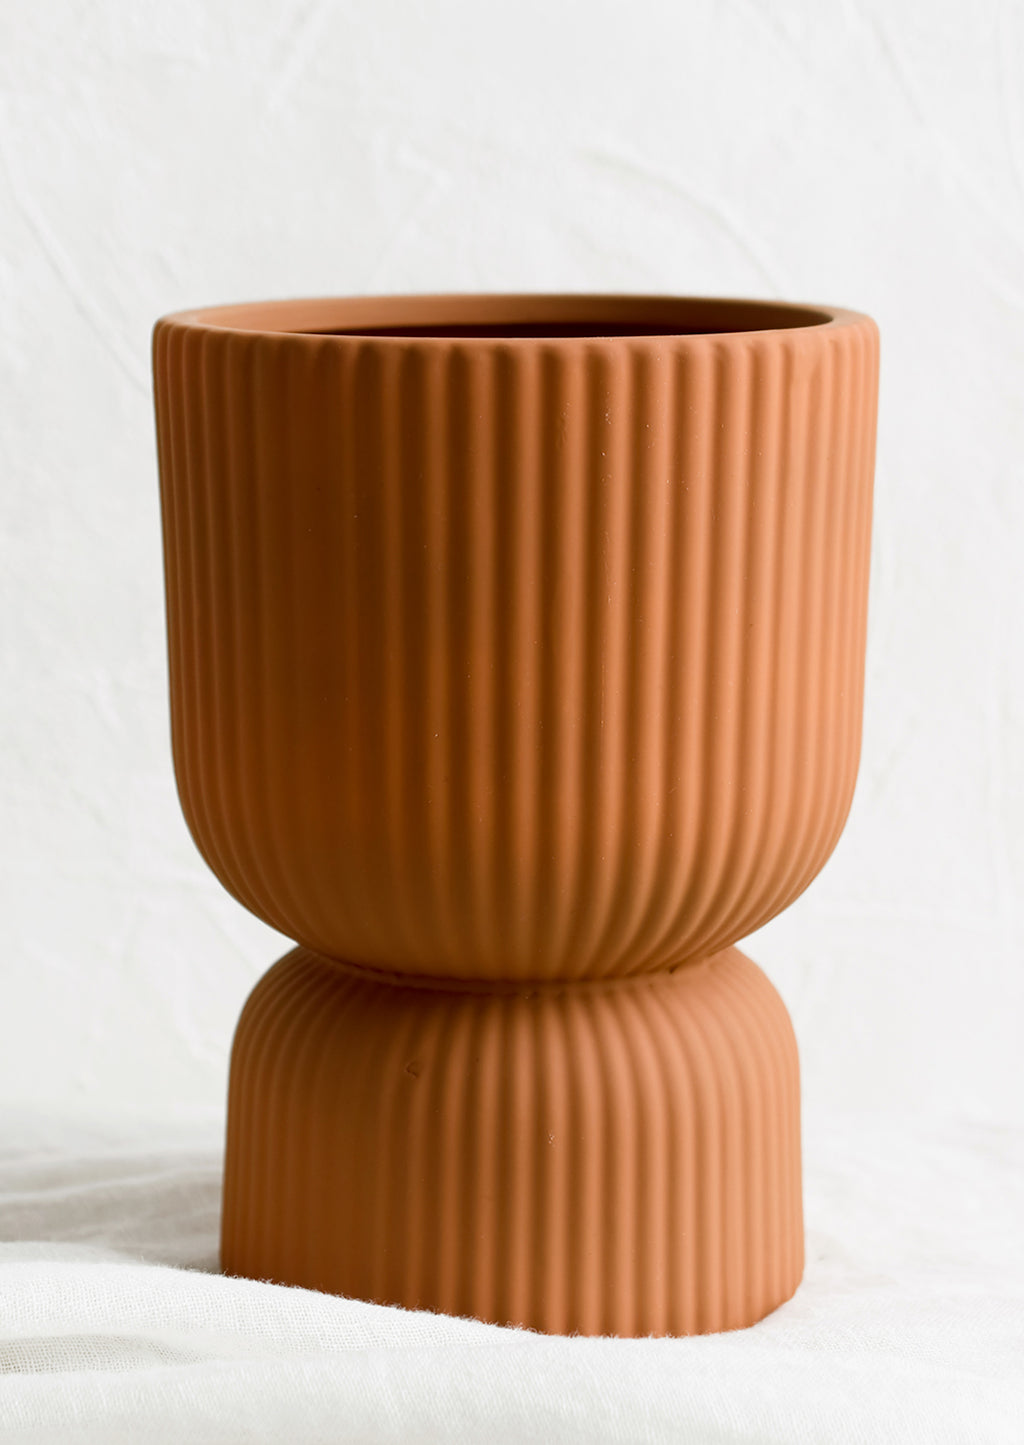 Large / Terracotta: A terracotta colored vase/planter in curvy silhouette with pinched middle.